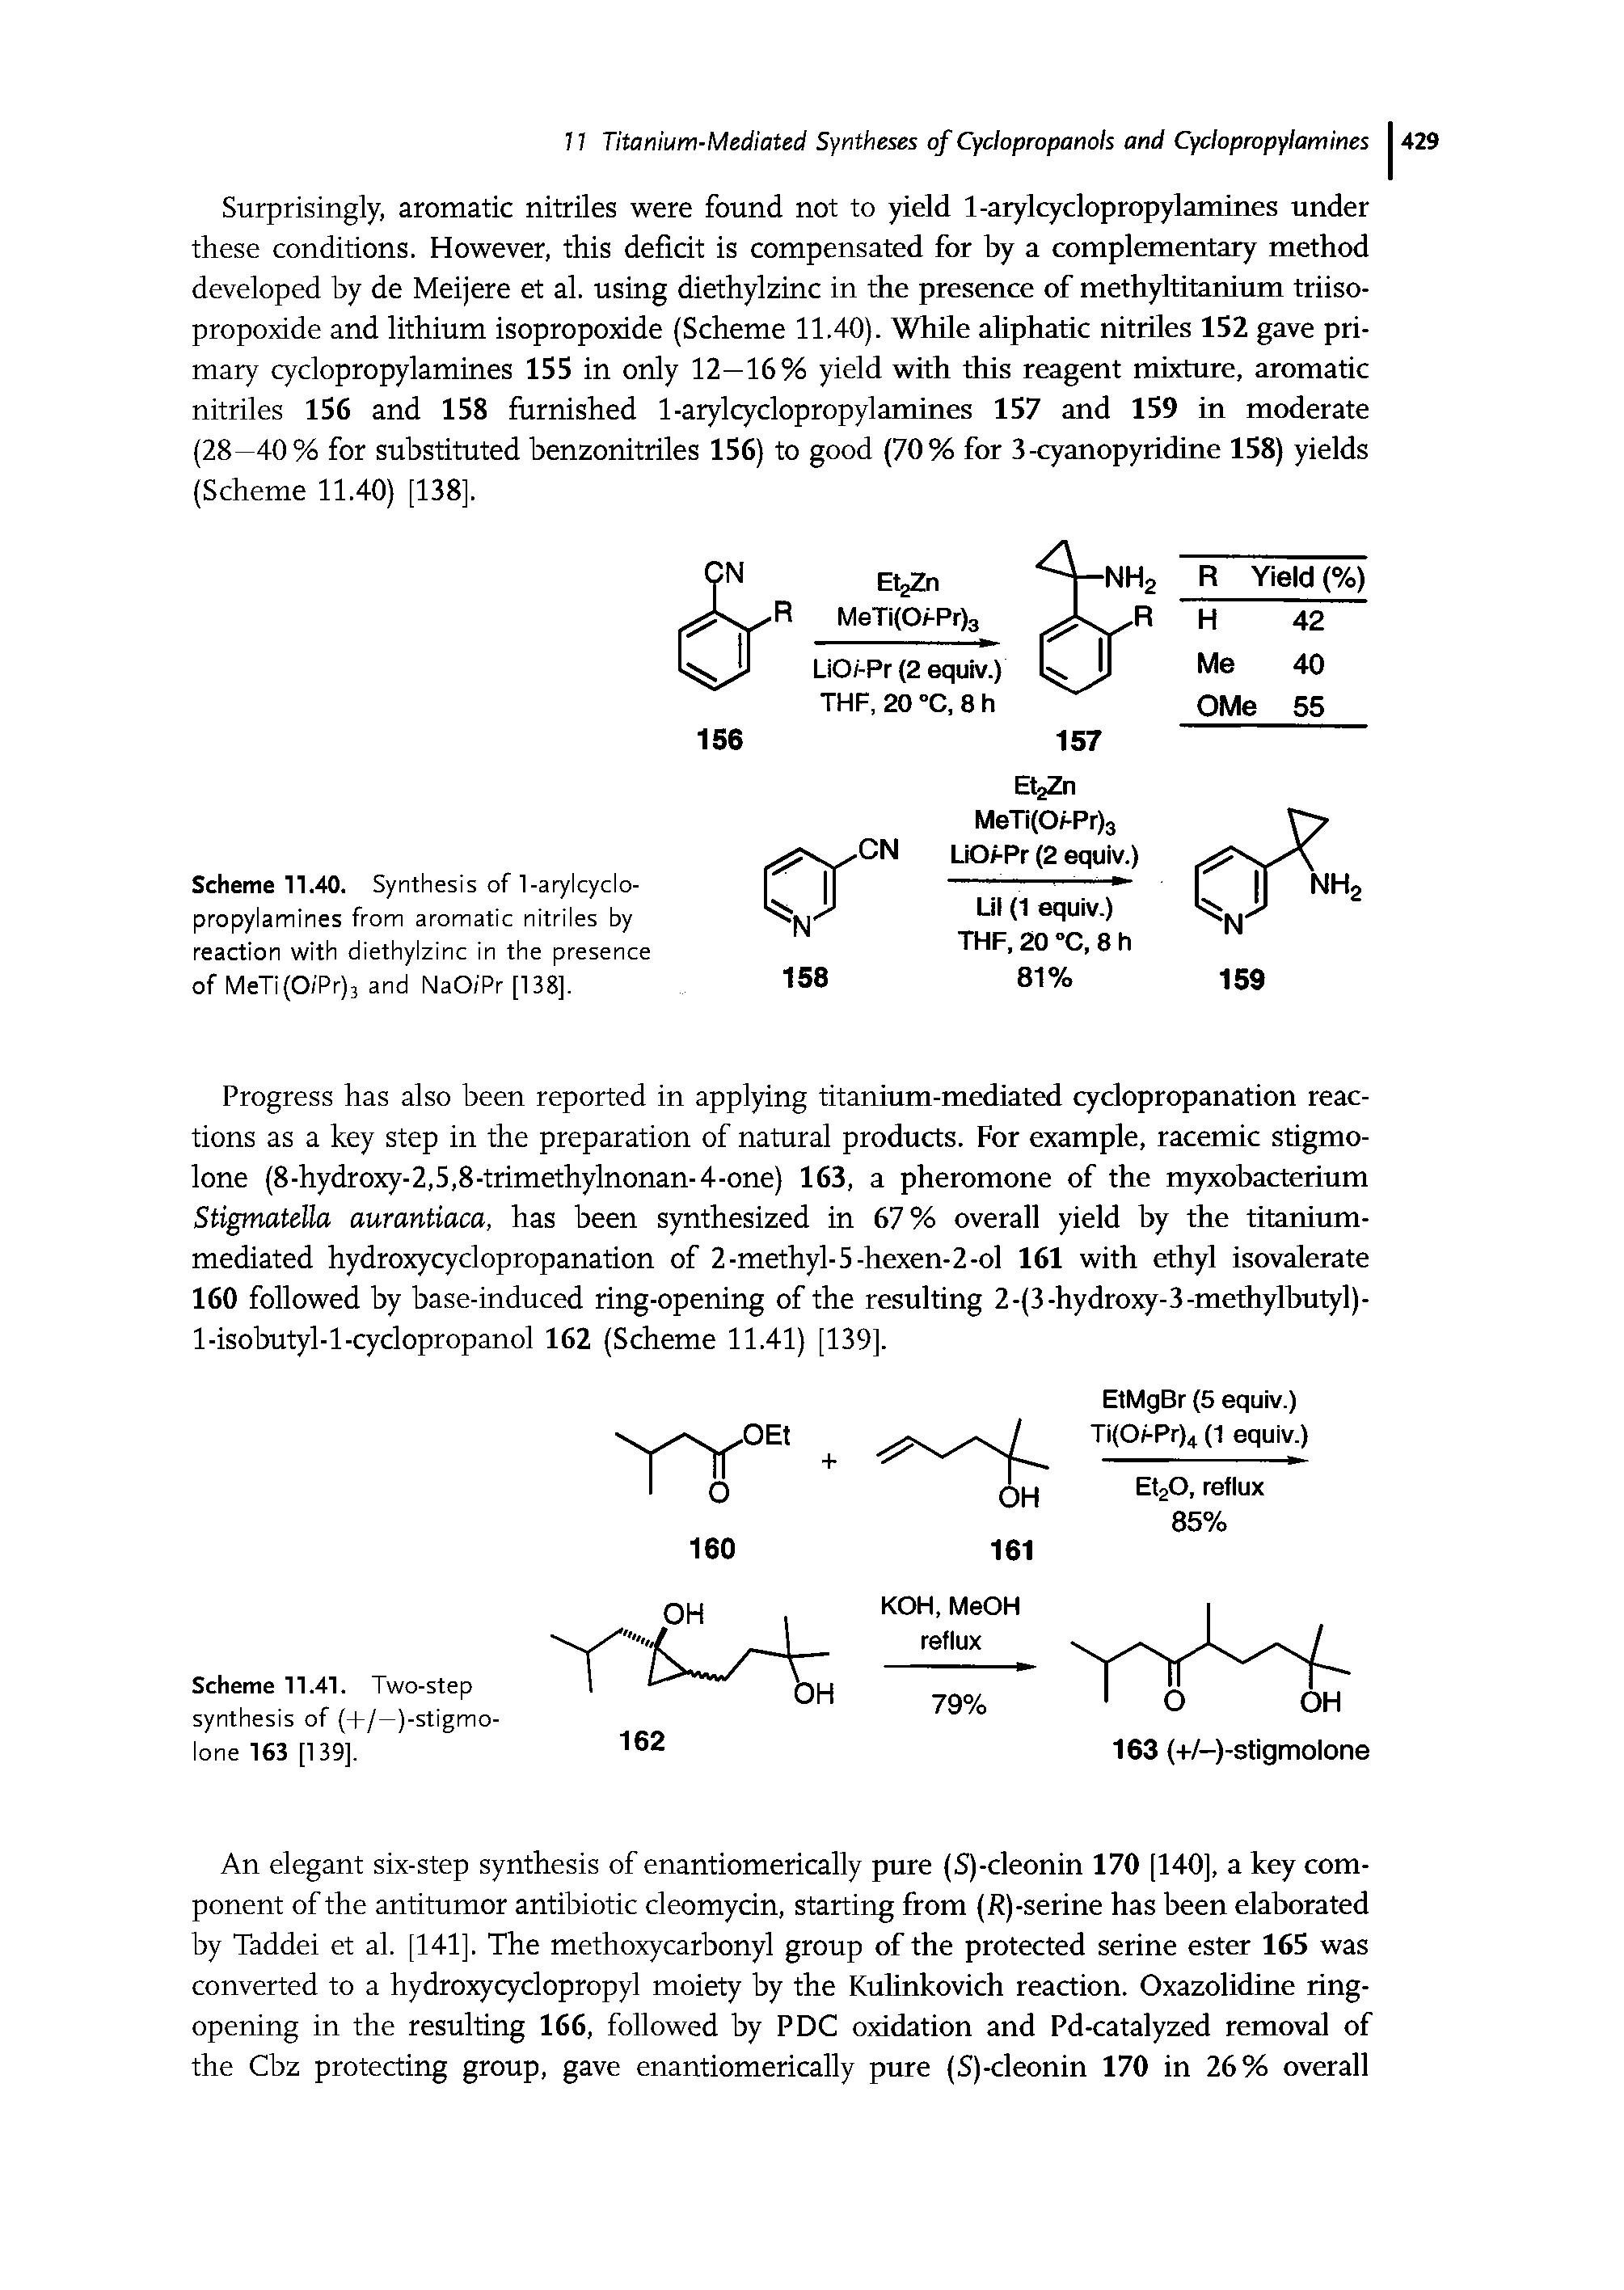 Scheme 11.40. Synthesis of 1-arylcyclo-propylamines from aromatic nitriles by reaction with diethylzinc in the presence of MeTi(0/Pr)3 and NaO/ Pr [138].